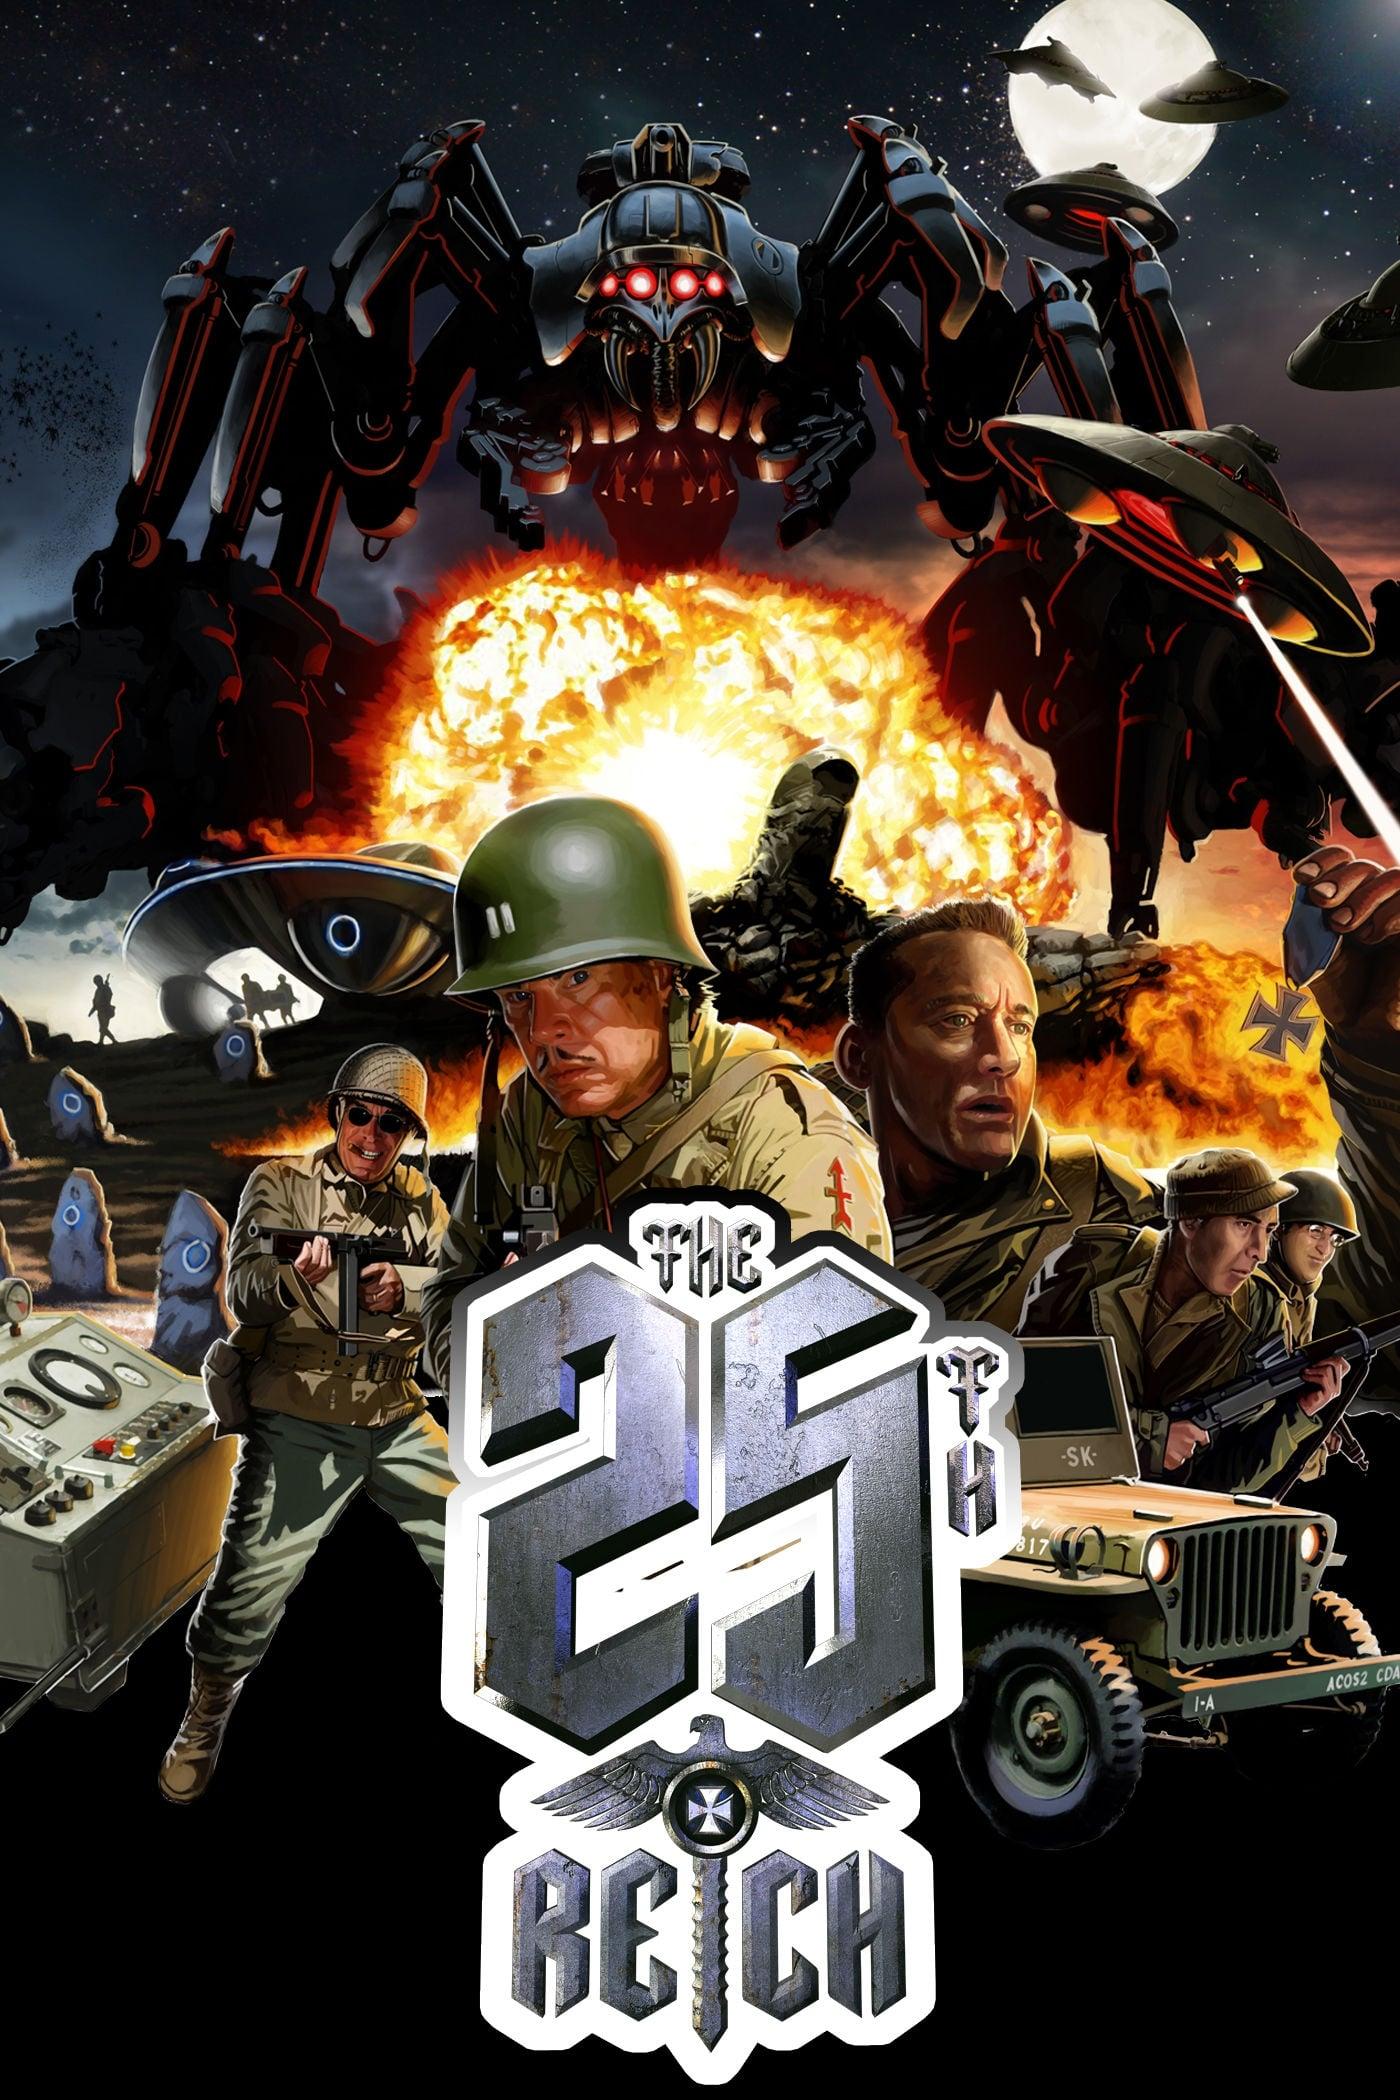 The 25th Reich poster